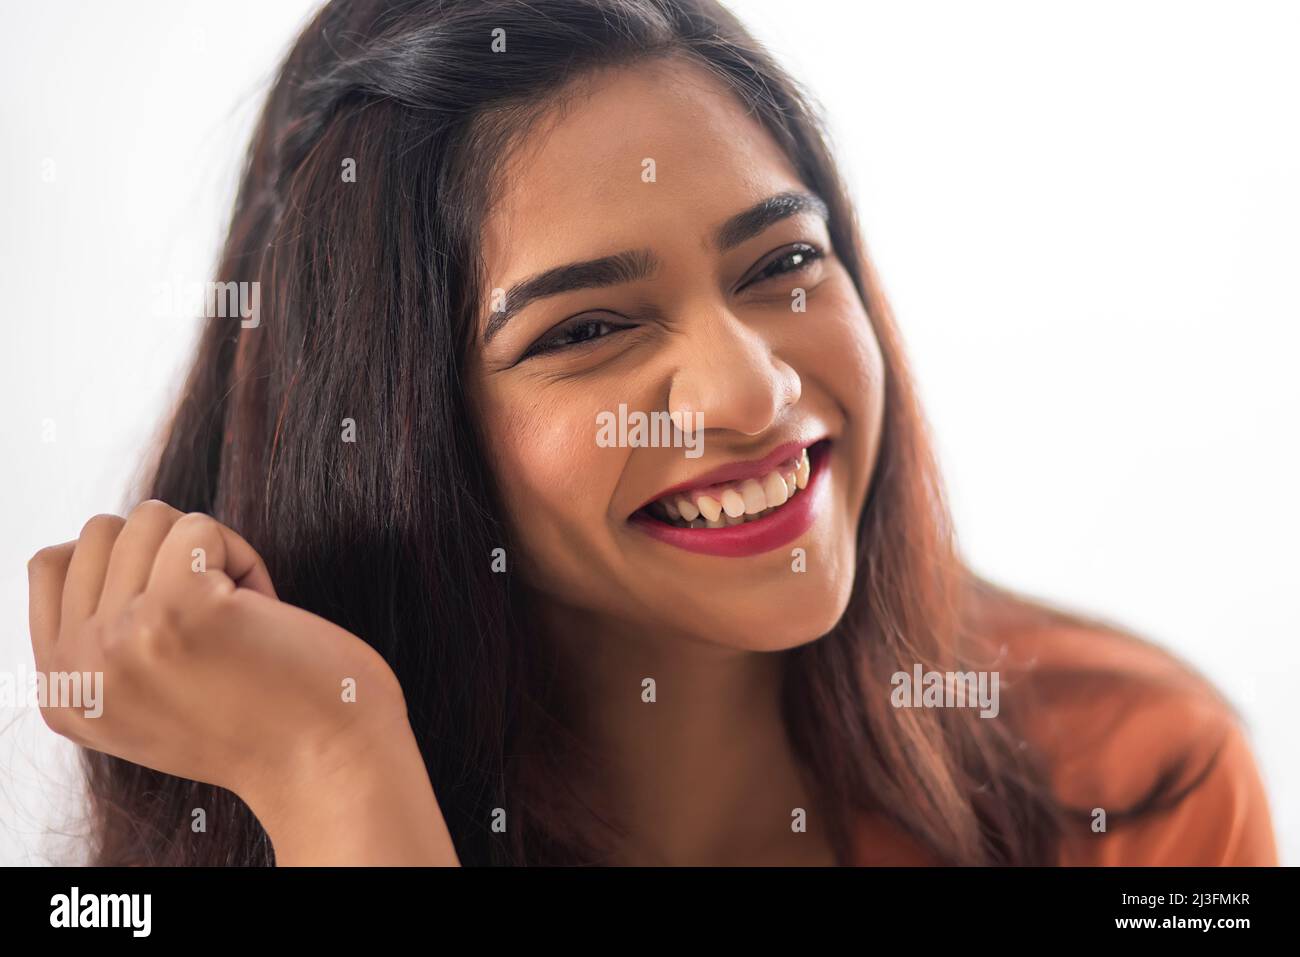 Close-up portrait of smiling woman with long black hair Stock Photo